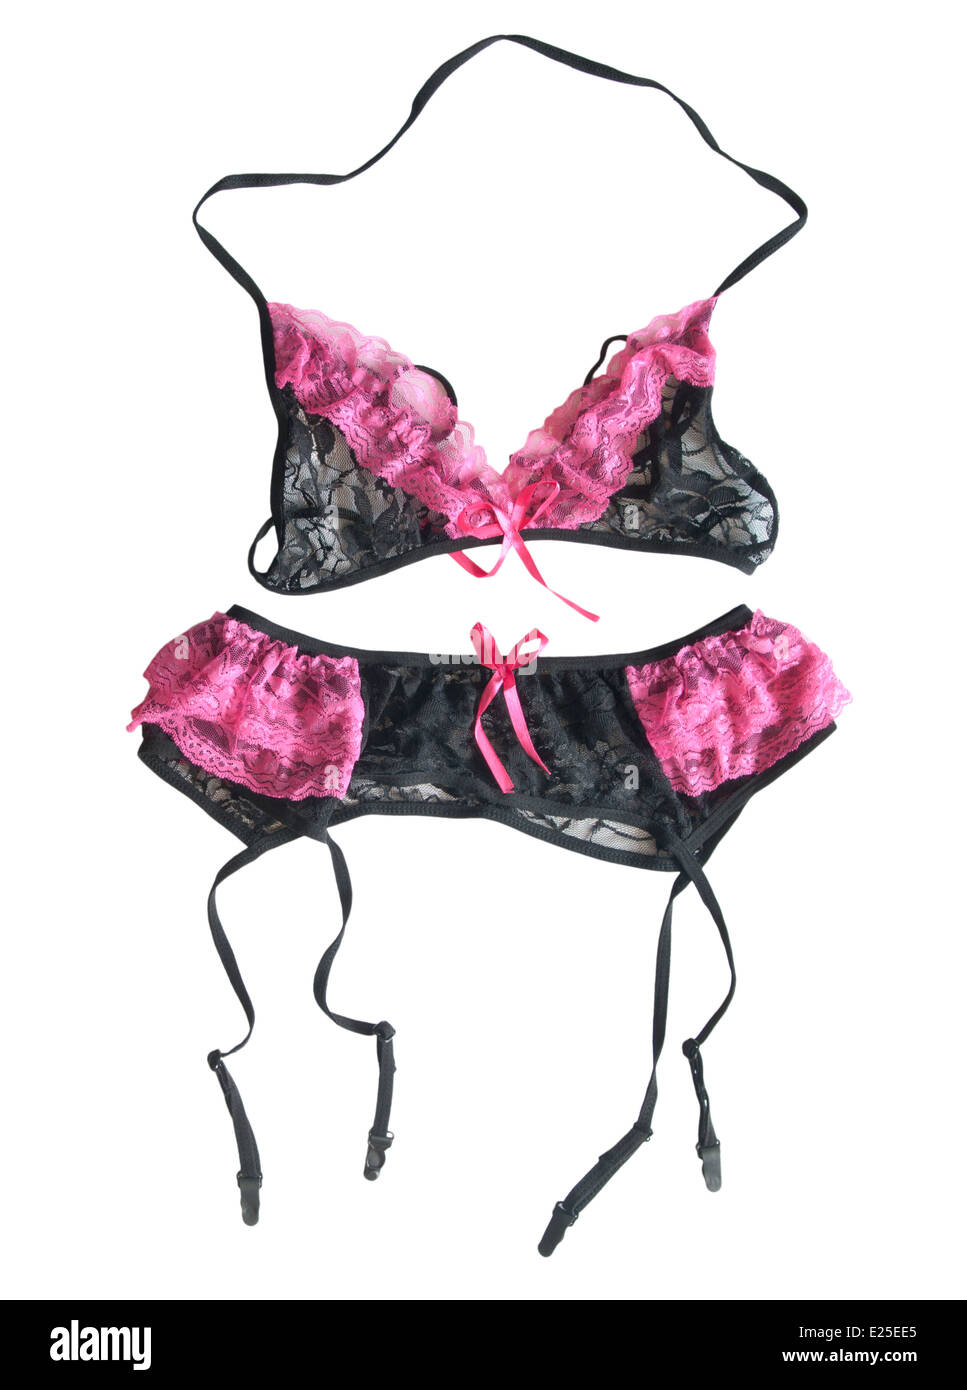 Sexy ladies Underwear Lacy Pink and Black Lingerie Bra and Suspender belt  Stock Photo - Alamy